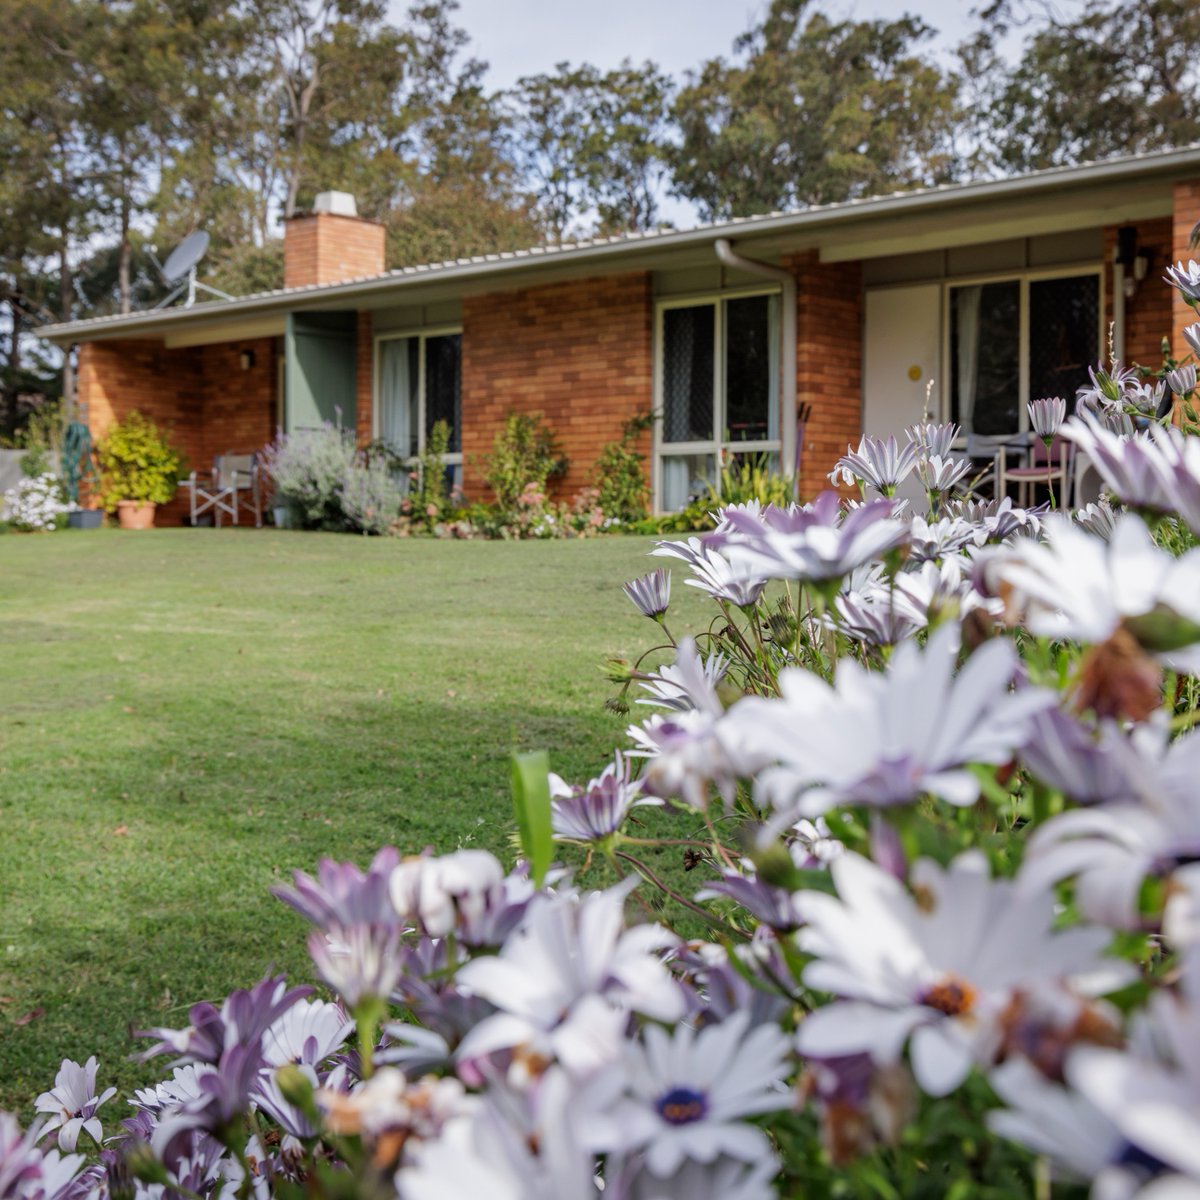 Considering a move to a residential aged care home? Book a tour with us! We'd love to show you around so that you can experience our warm, welcoming homes firsthand. Call our team on 1300 610 610 or visit our your closest home: bit.ly/3uMIeZw #residentialagedcare